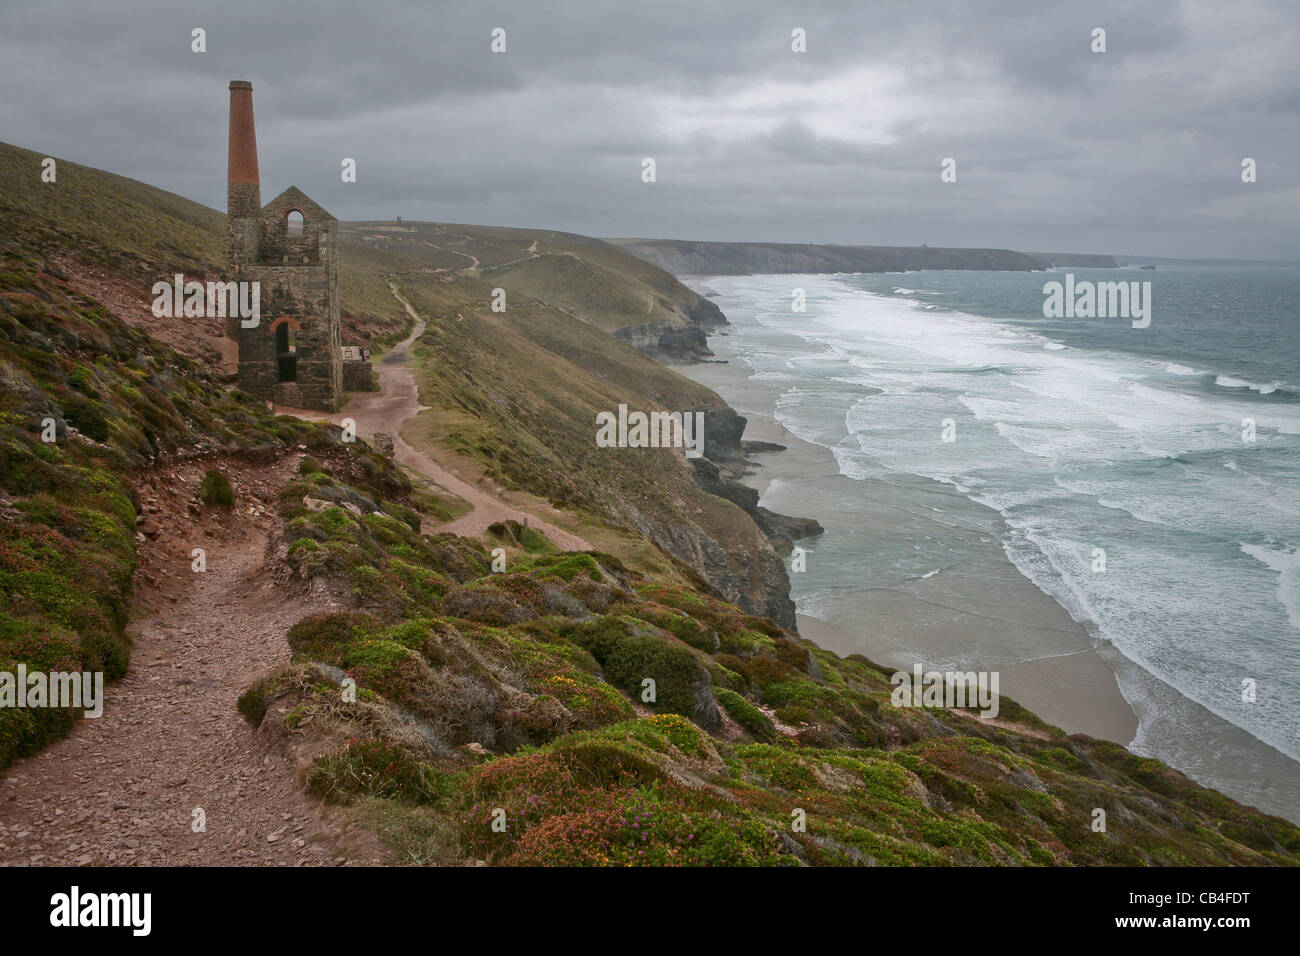 Coastal walk along the cliffs by the Wheal Coates Tin Mine, Chapel Porth on a stormy day. Stock Photo